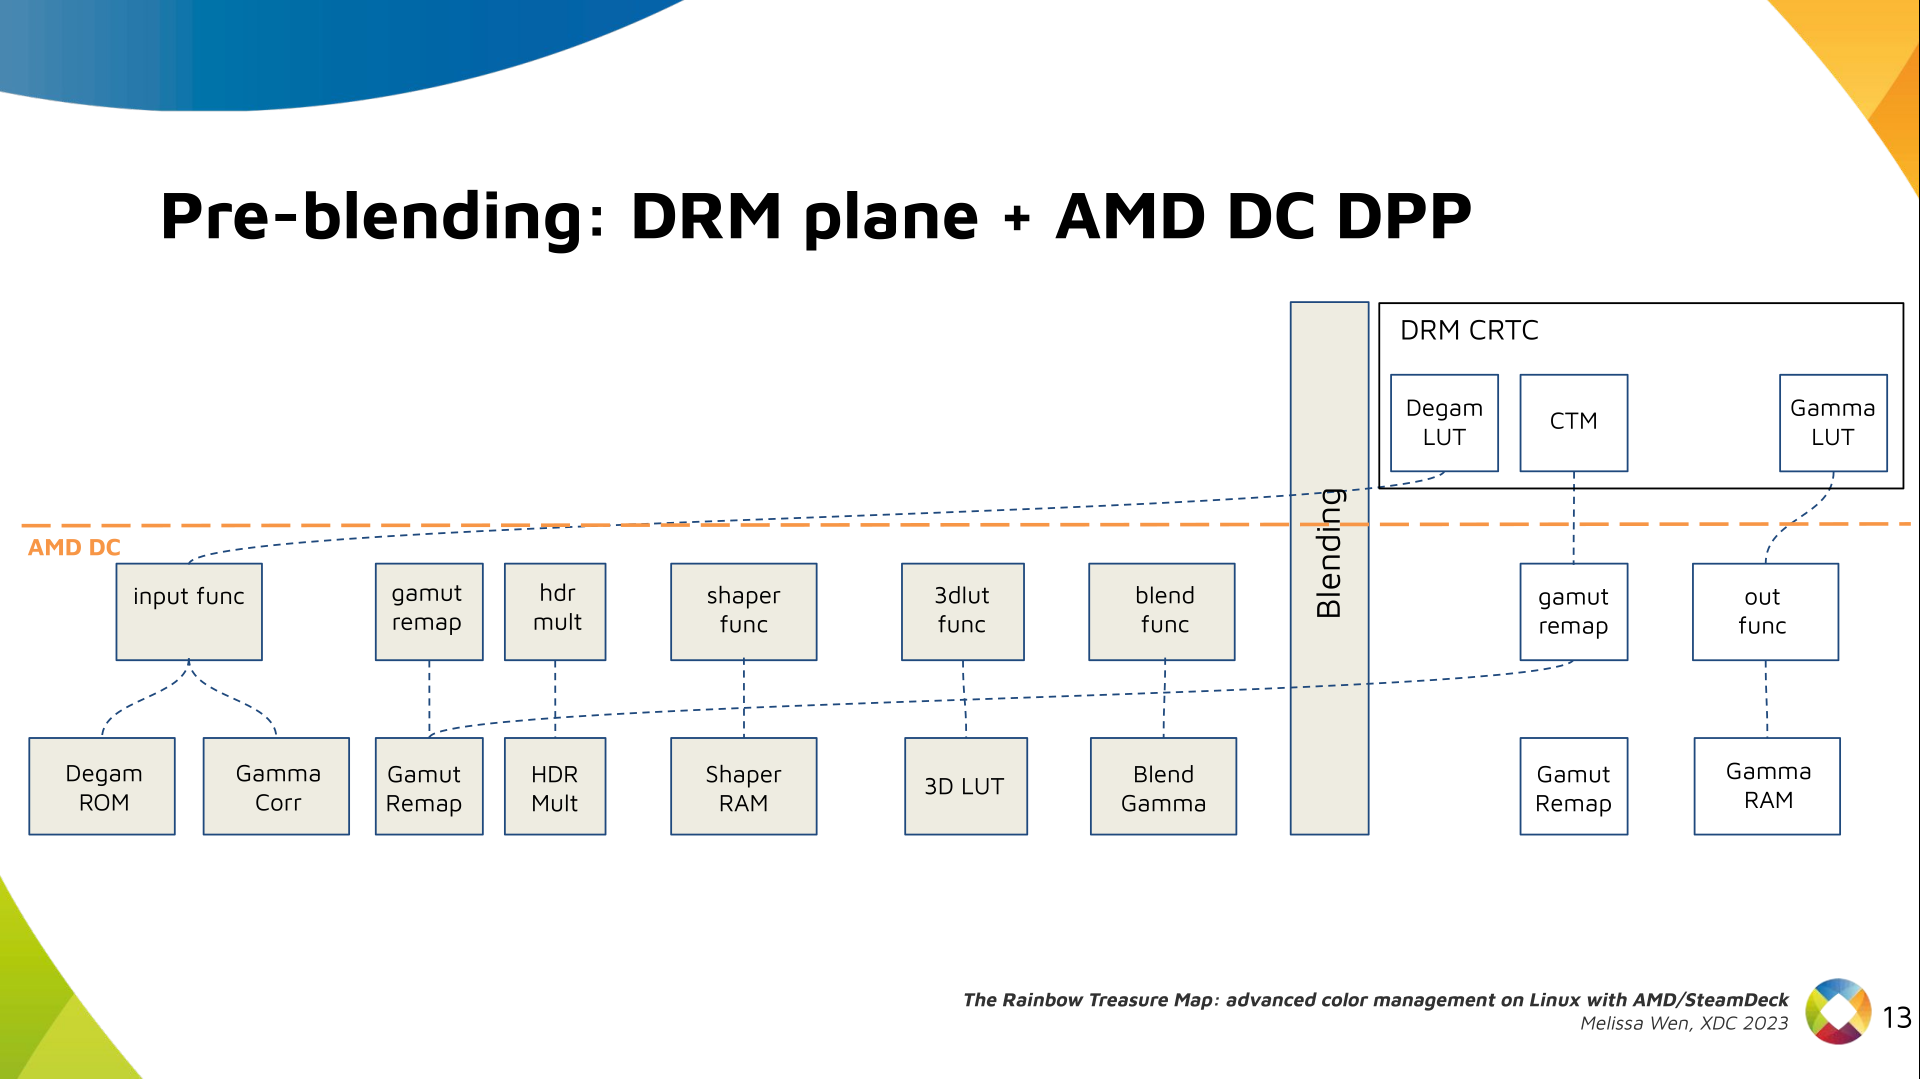 Slide 12: Diagram with color capabilities and structures in AMD DC layer without any DRM plane color interface (before blending), only the DRM CRTC color interface for post blending